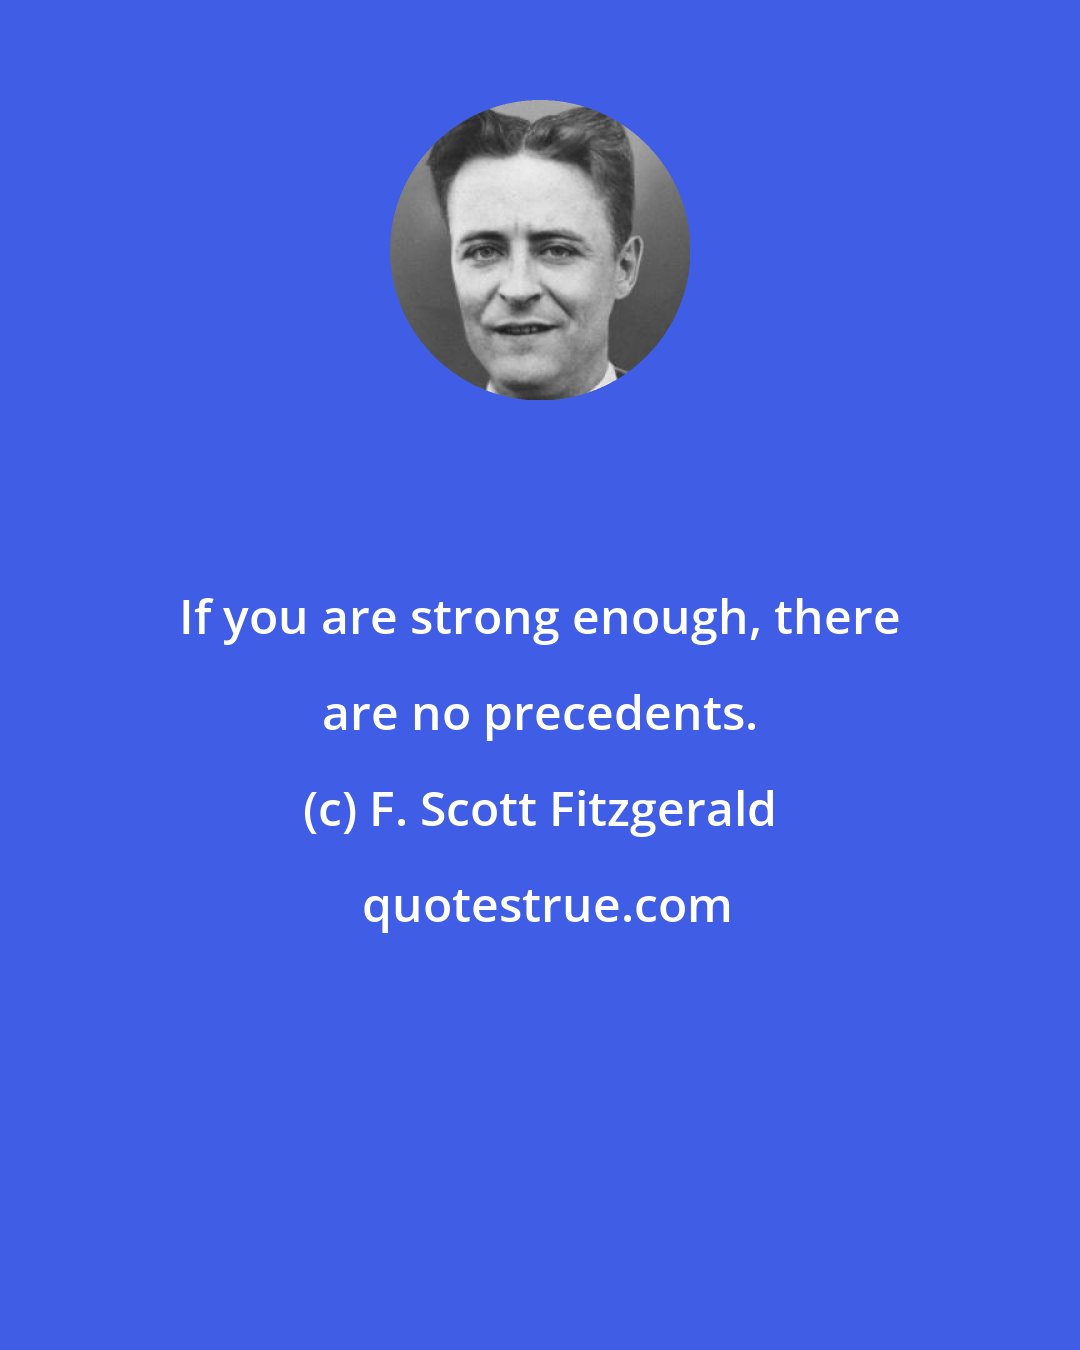 F. Scott Fitzgerald: If you are strong enough, there are no precedents.